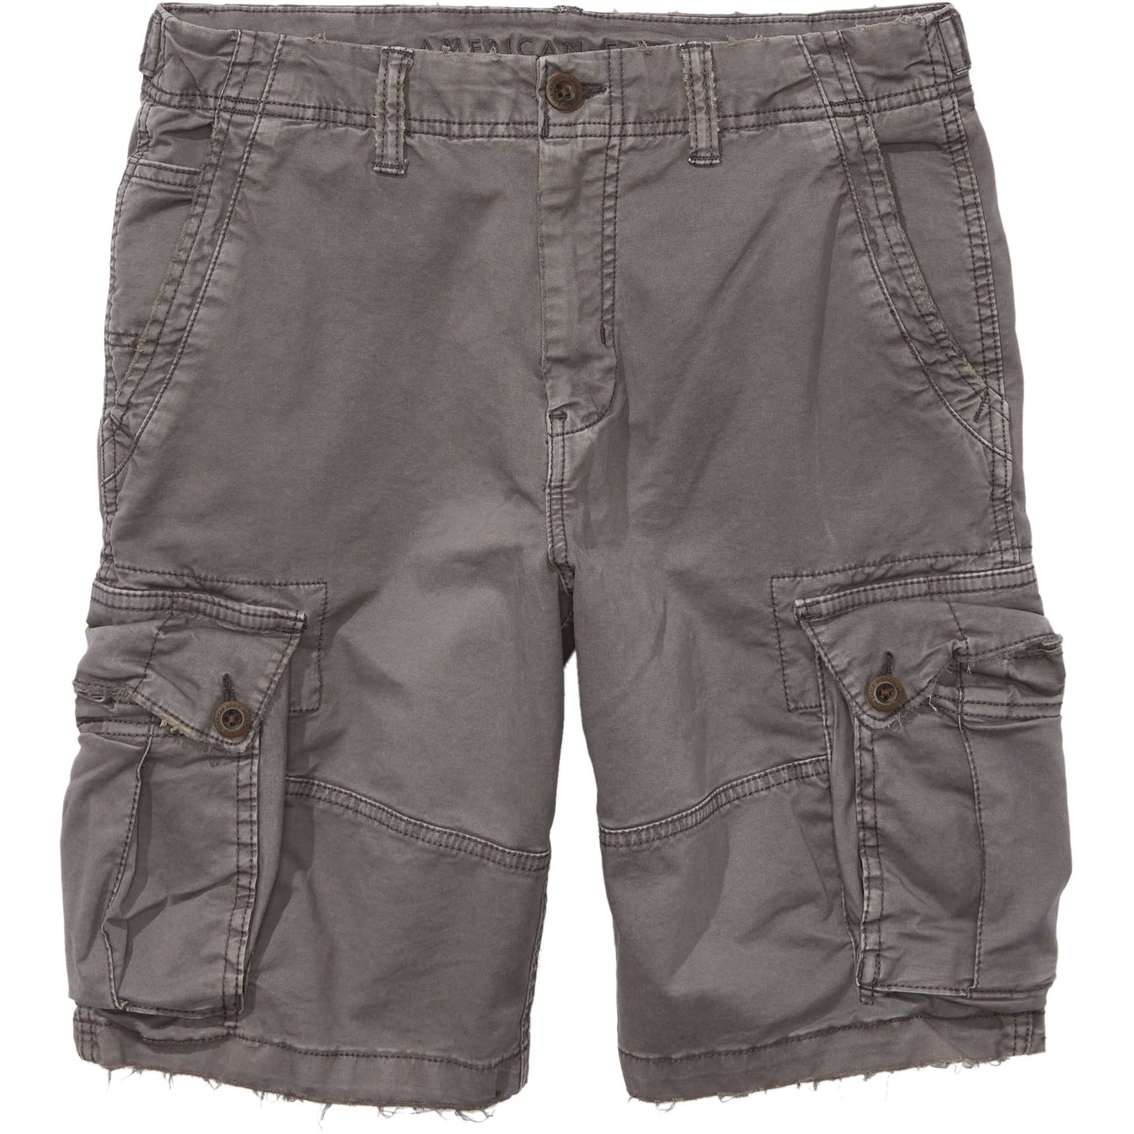 American Eagle Flex 10 in. Lived In Cargo Shorts - Image 1 of 2